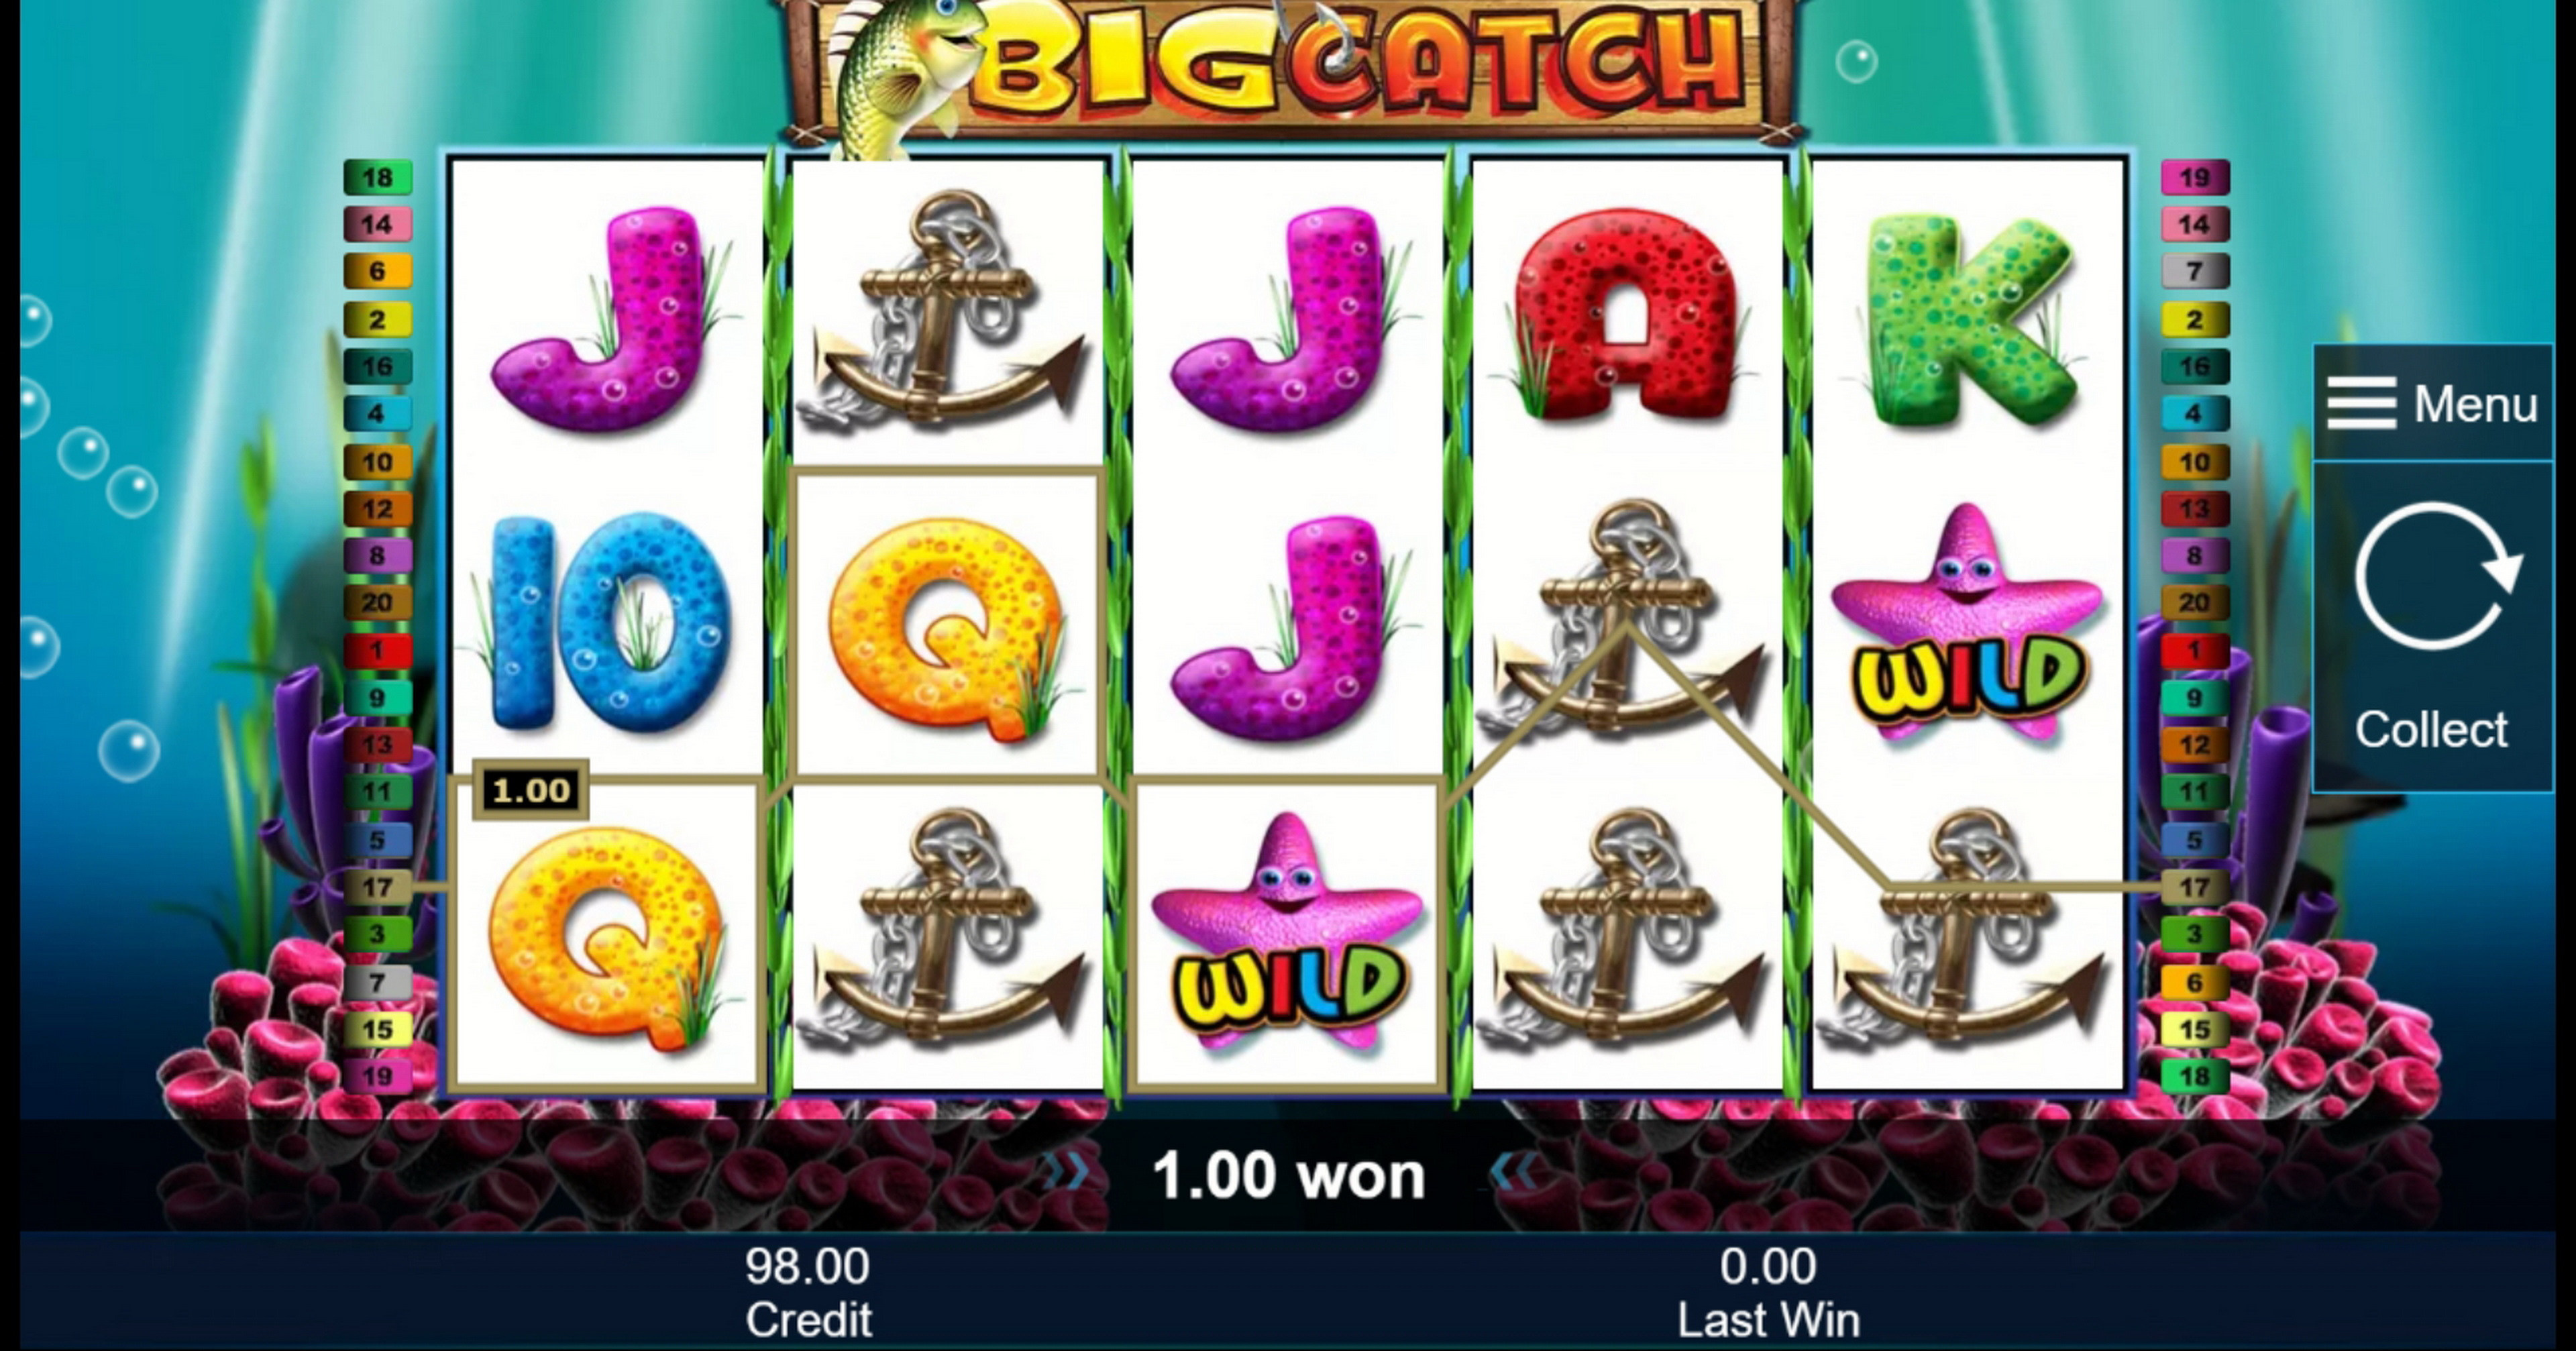 Win Money in Big Catch Free Slot Game by Greentube